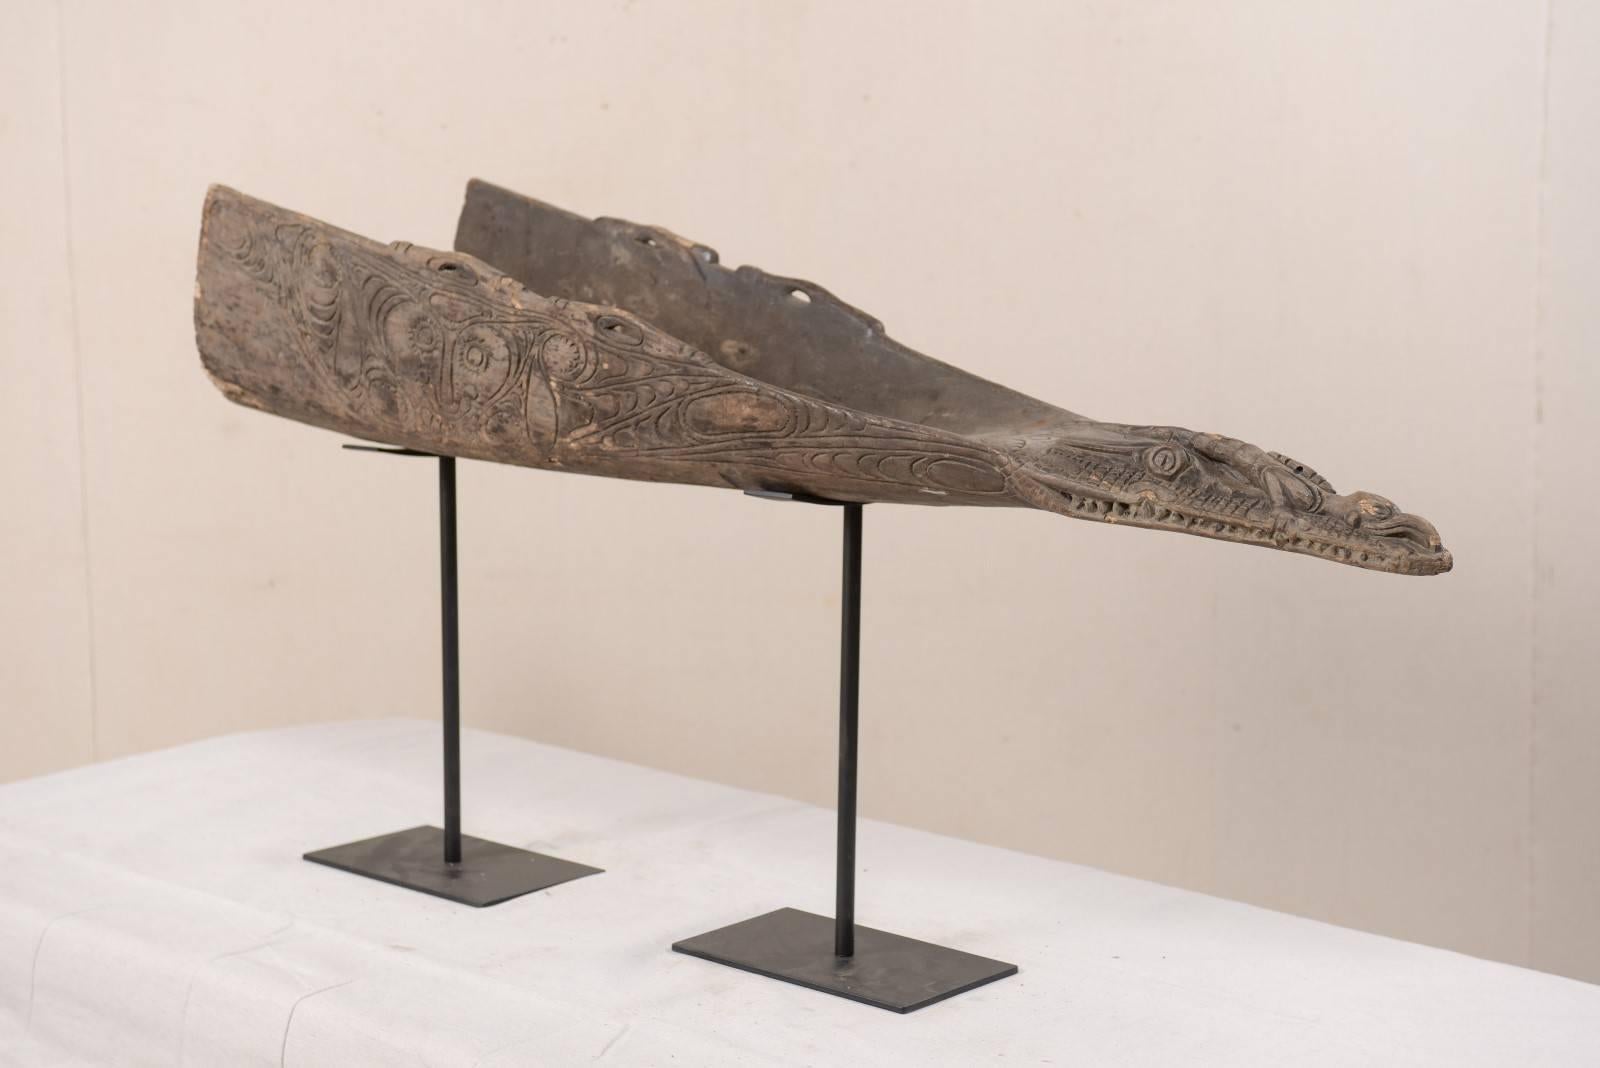 Papua New Guinean Hand-Carved Wood Boat Prow on Iron Stand from Papua New Guinea, Mid-20th Century